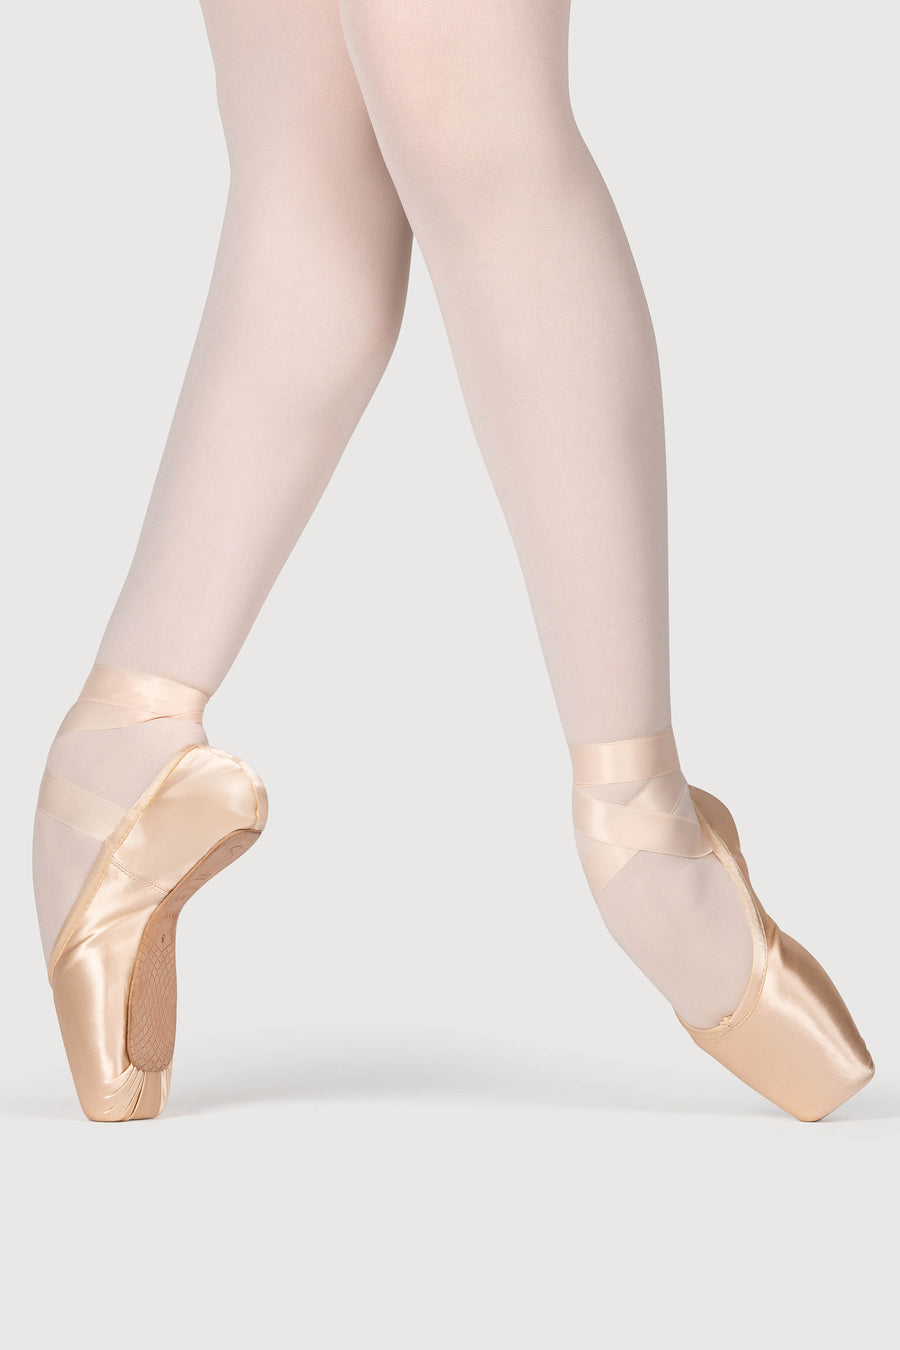 Bloch Synthesis Pointe Shoe S0175